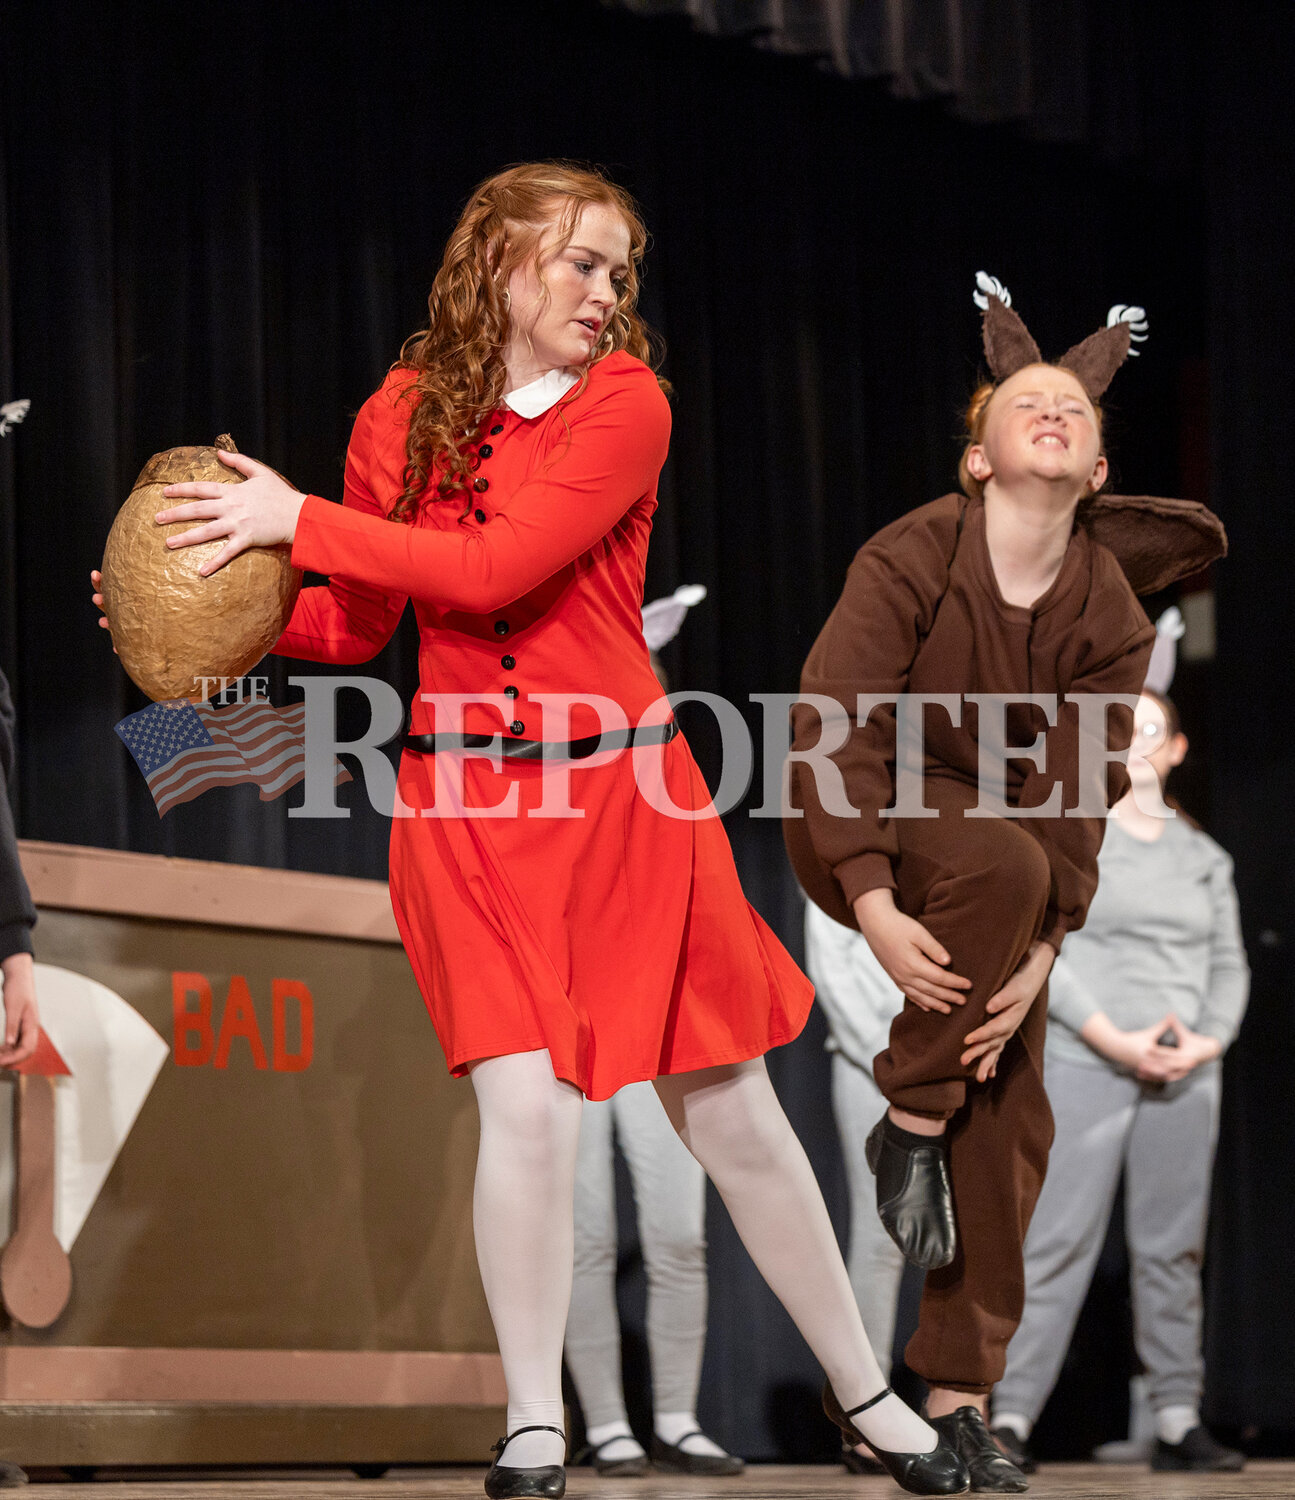 Veruca Salt played by Eve Foster snatches a nut from a squirrel played by her sister, Martie Foster, during Willy Wonka Saturday, March 23.